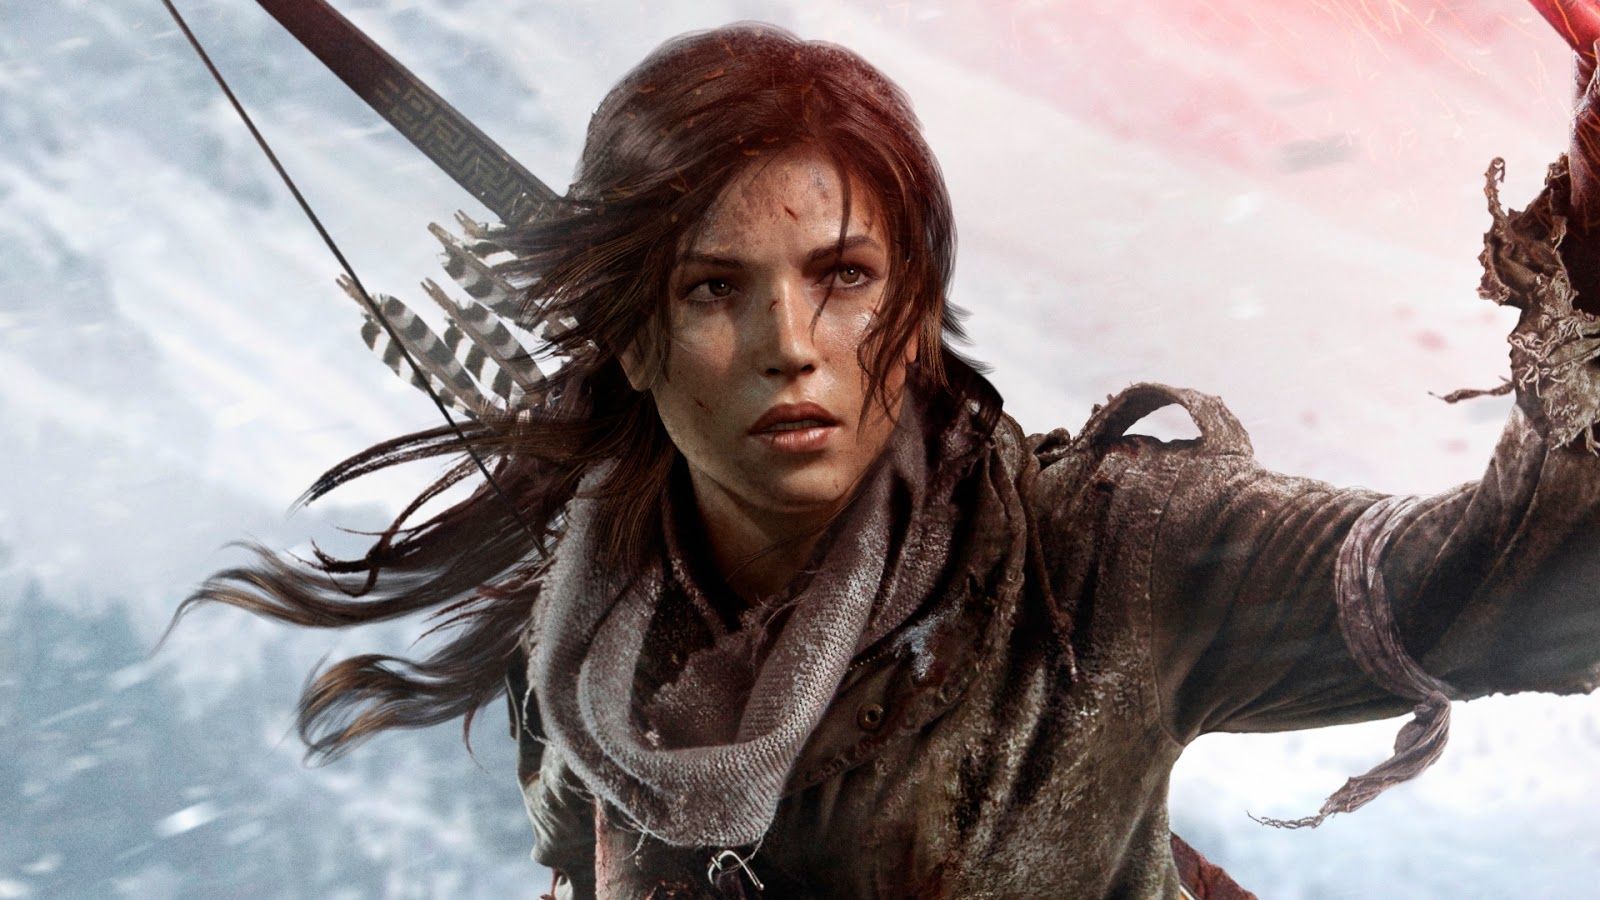 Here's a first look at Rise of the Tomb Raider's upcoming 'Baba Yaga' DLC